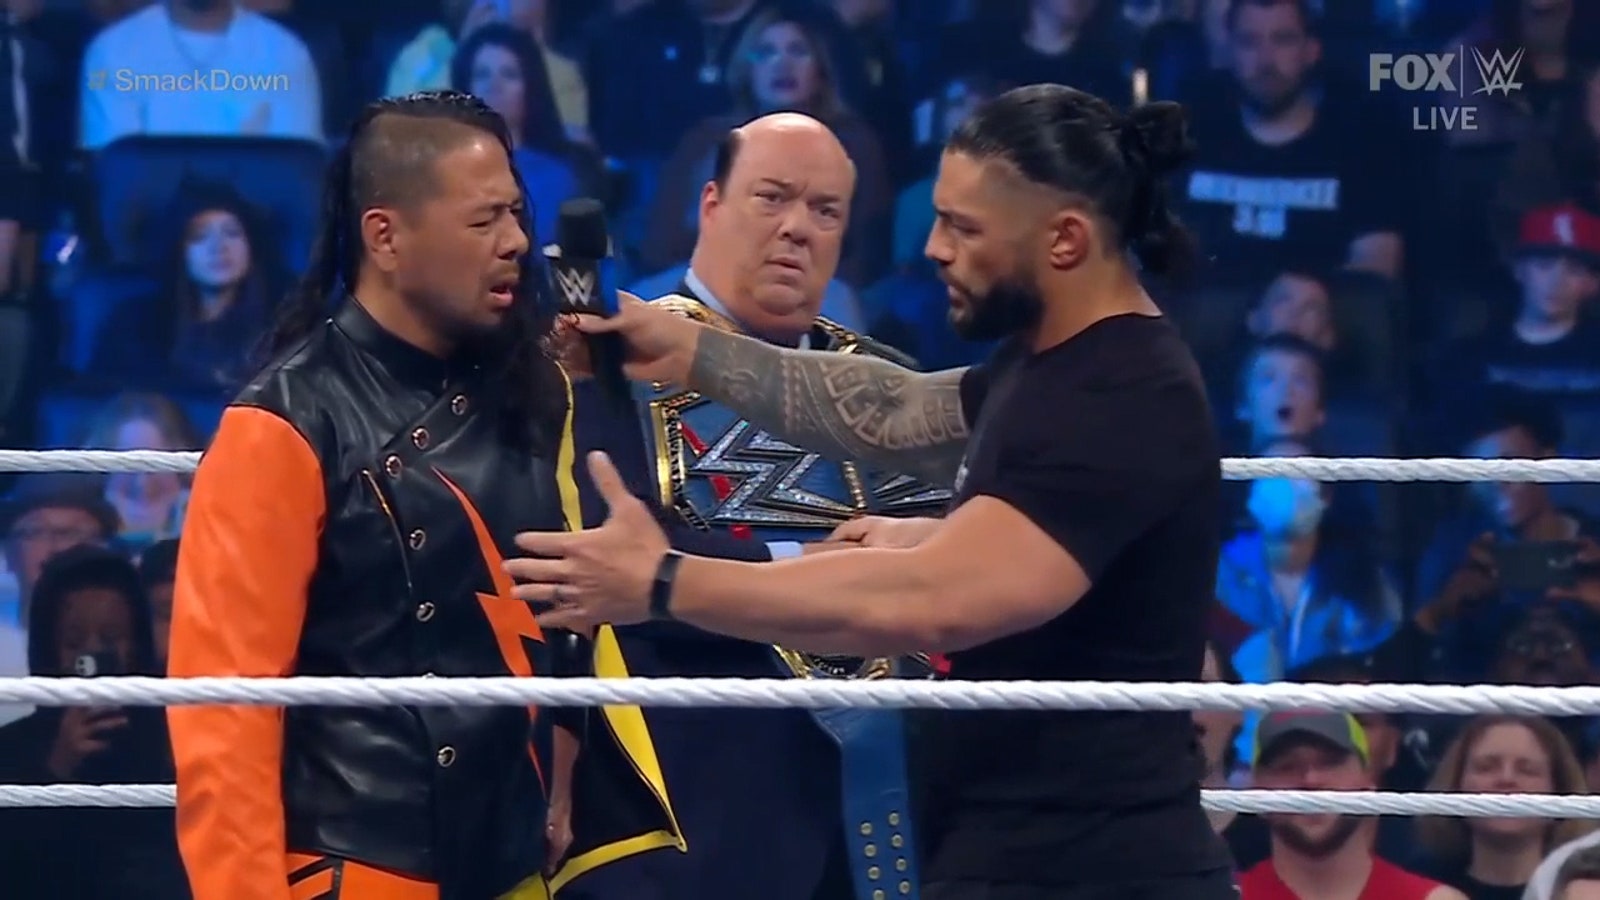 Roman Reigns plans for The Usos to unify the Tag Team Titles I WWE on FOX